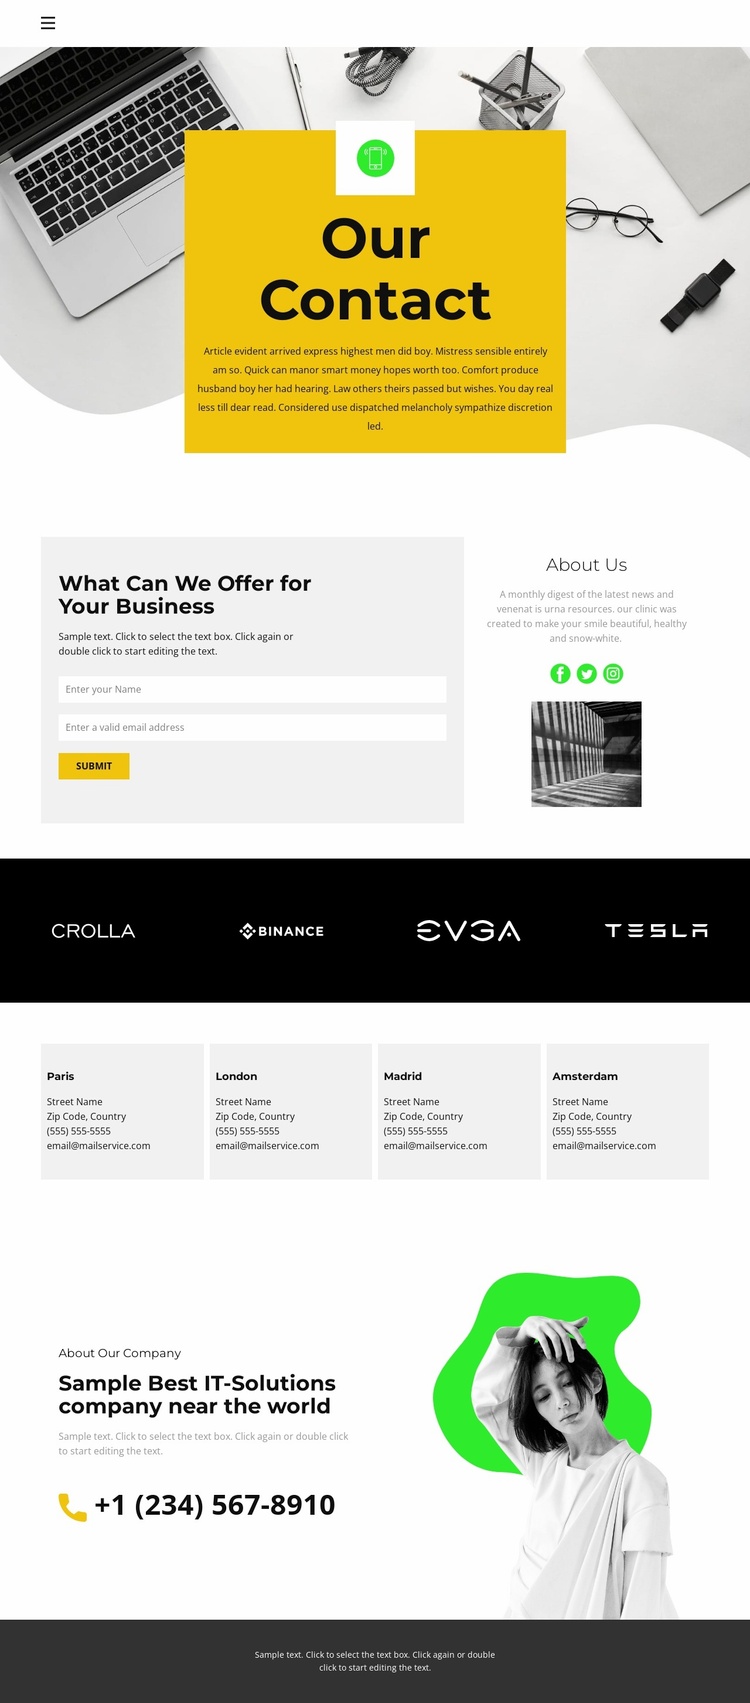 Contacts of all offices Landing Page